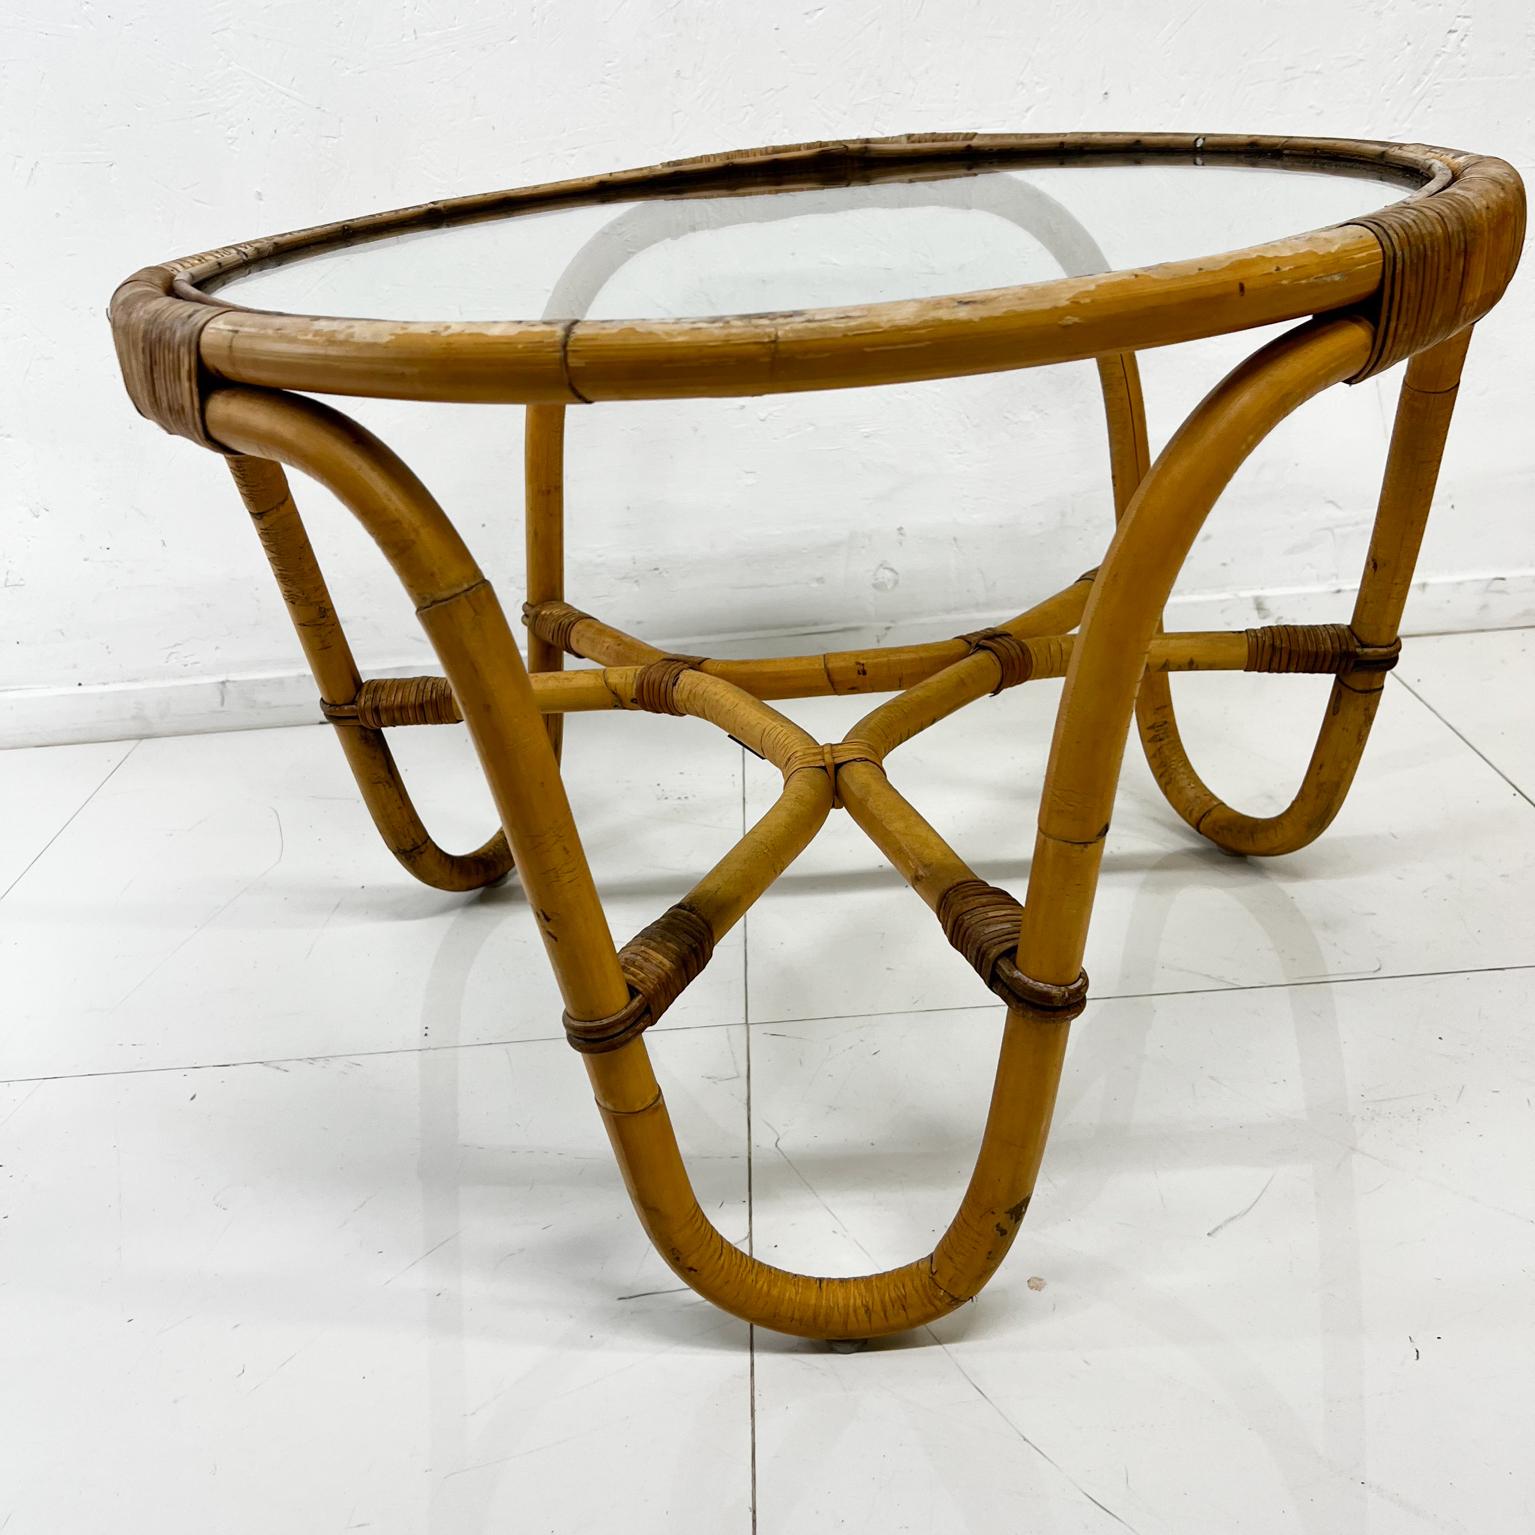 Mid-20th Century 1936 Arne Jacobsen for Sika-Design Natural Rattan Charlottenborg Table For Sale